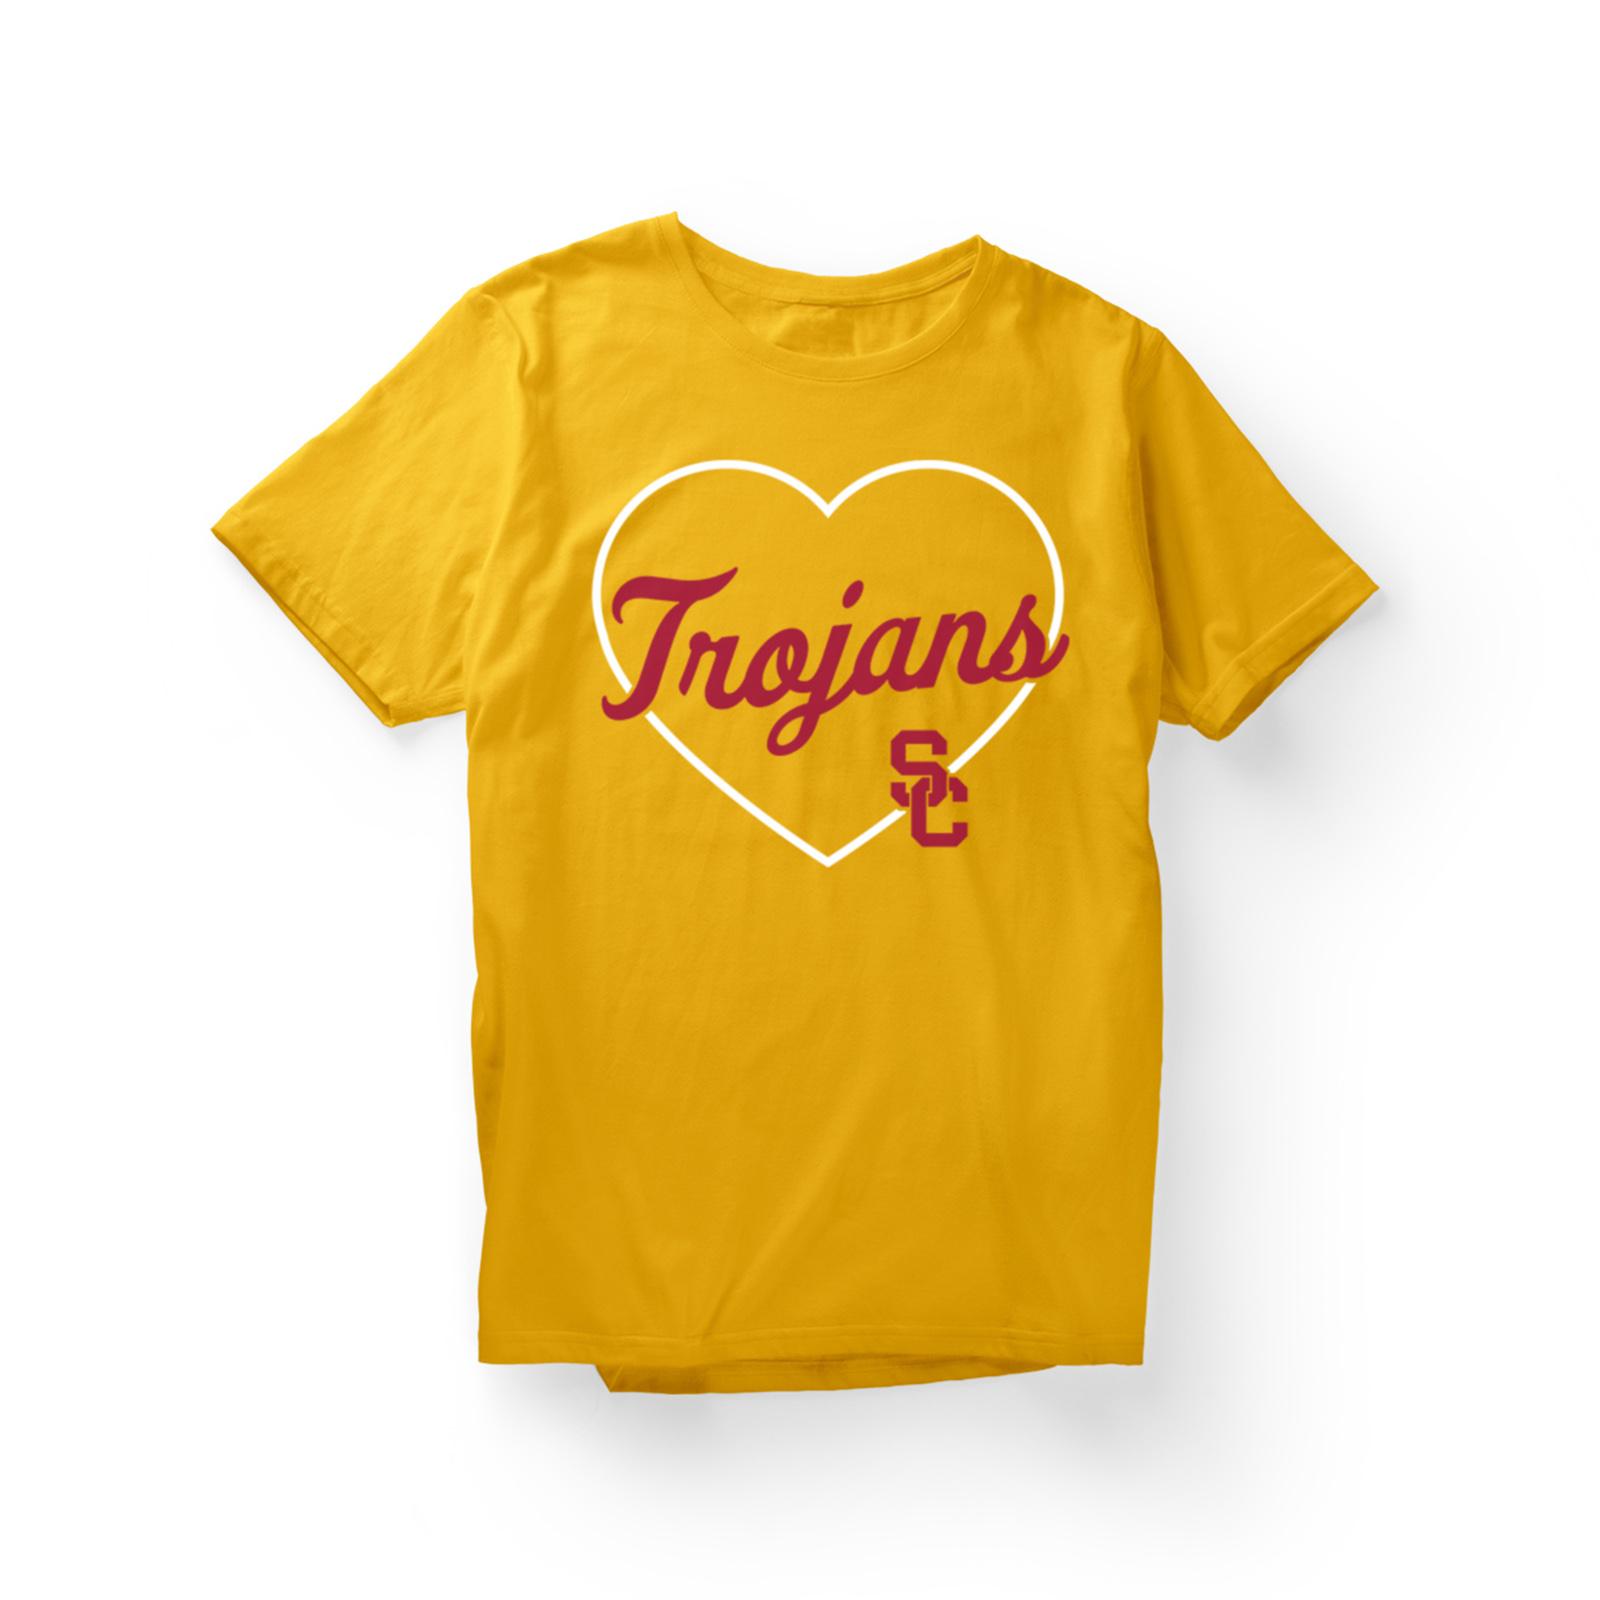 Trojans Heart Youth SS Tee Gold image01